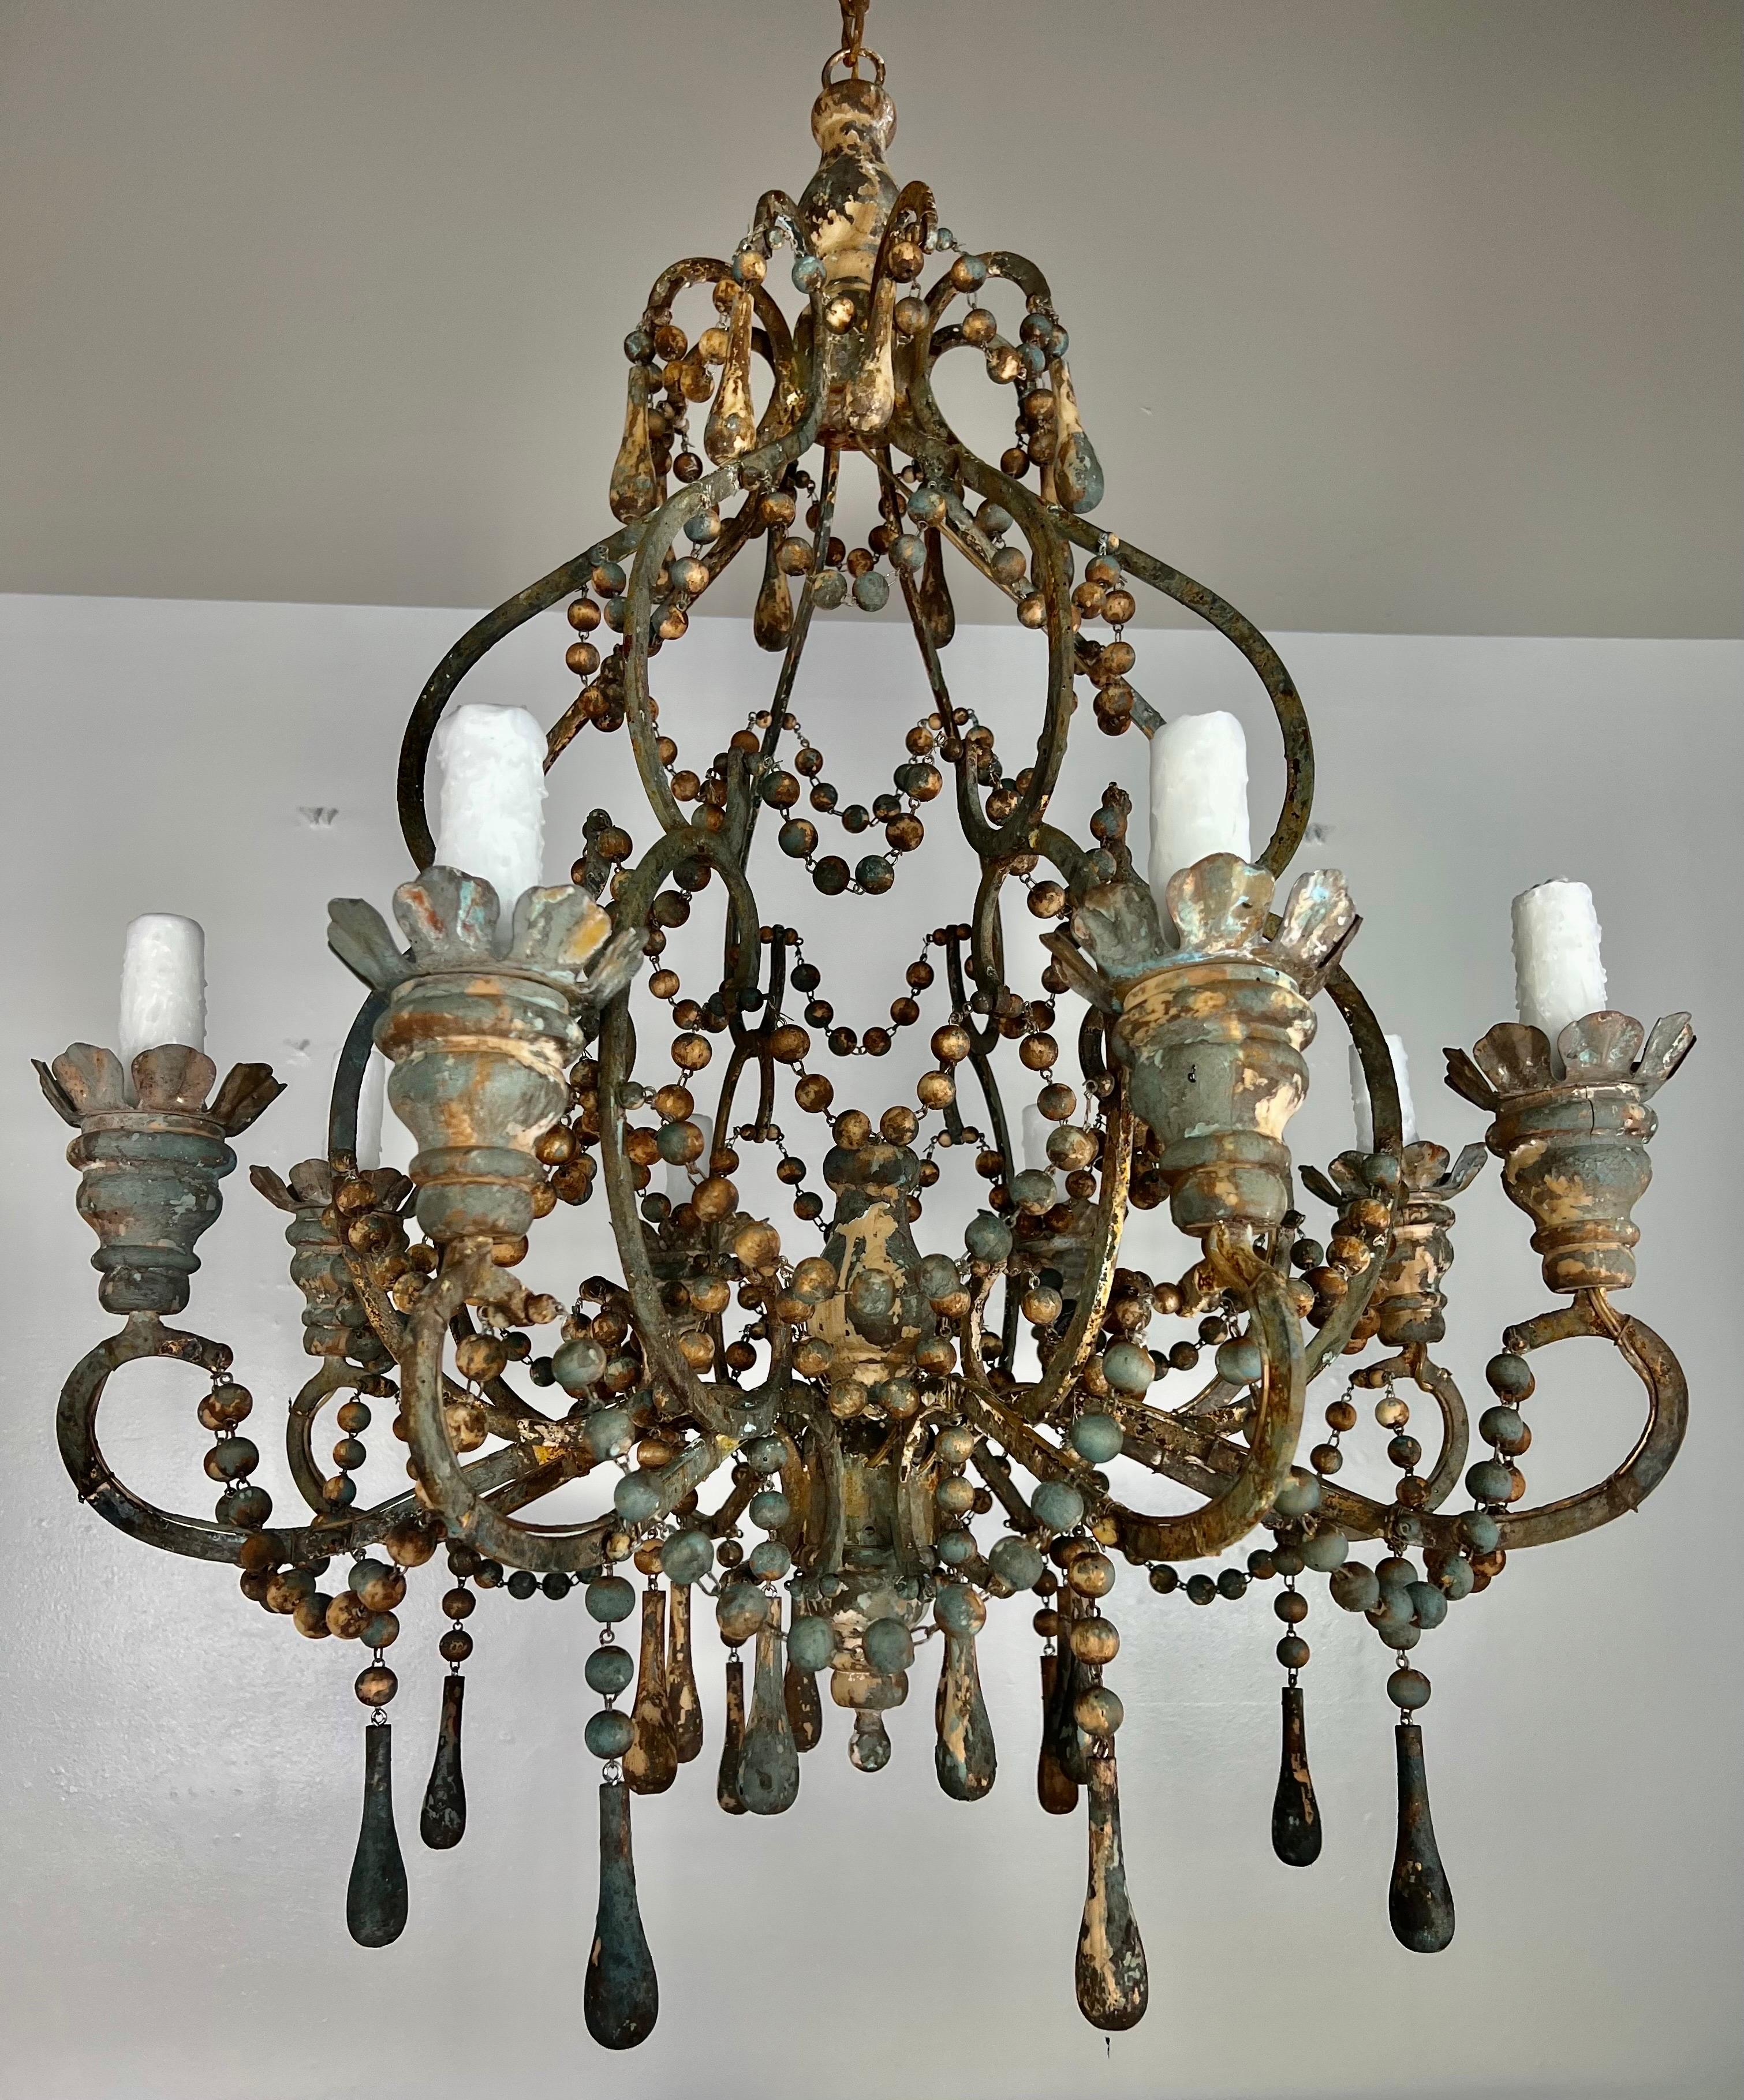 Custom Eight light Italian style wood & Iron Painted Chandelier by Melissa Levinson. Blue, gold, and cream can be seen throughout the chandelier. the fixture is newly wired with drip wax candle covers. Includes chain & canopy.